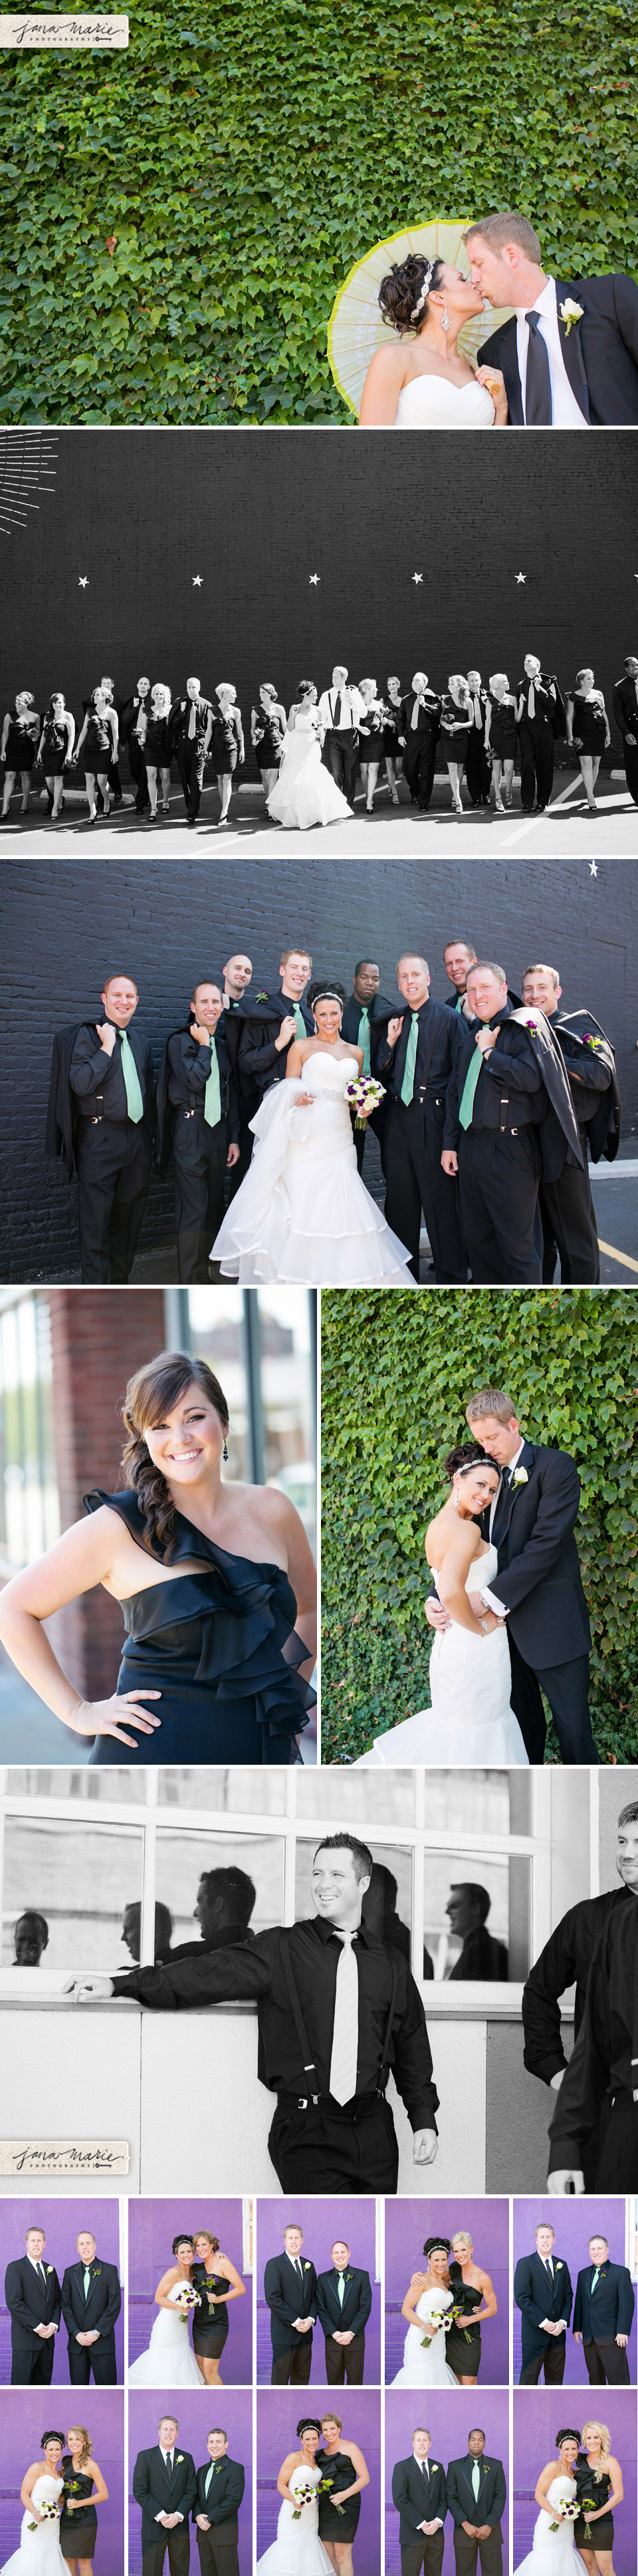 maid of honor, outdoor portraits, Wedding day, family, bridal party, Jana Marie Photography